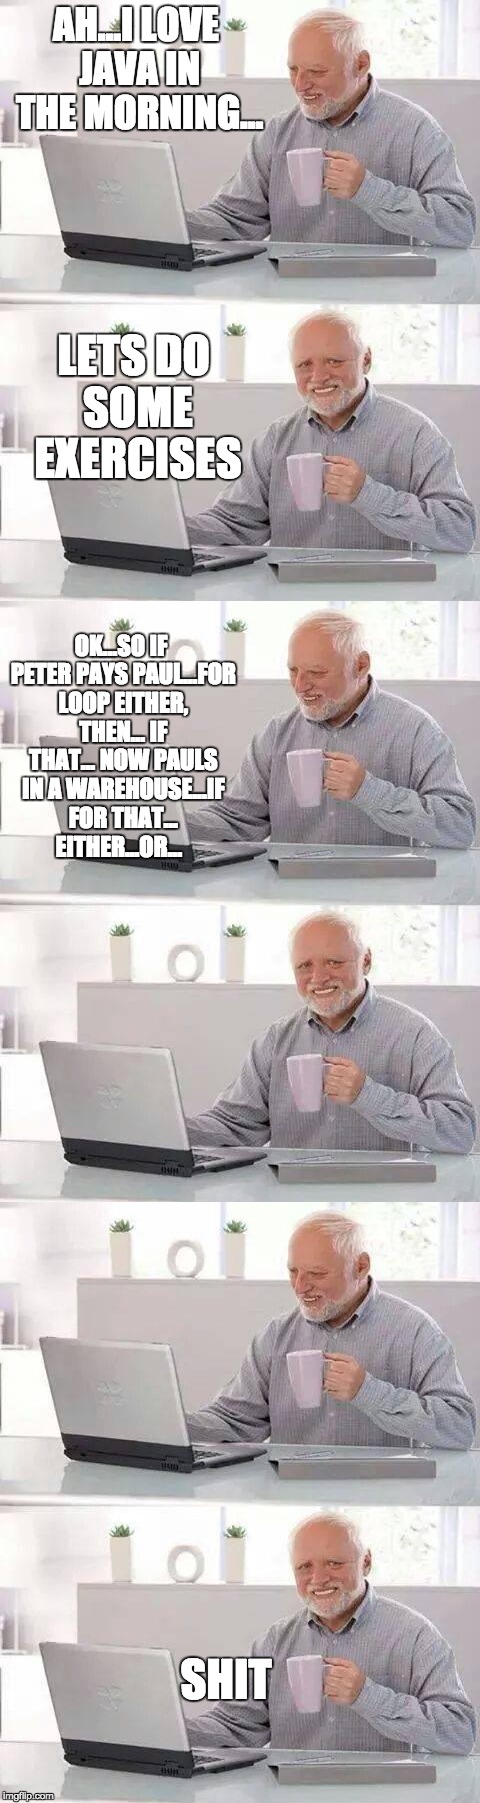 A fresh start to the day... | AH...I LOVE JAVA IN THE MORNING... LETS DO SOME EXERCISES; OK...SO IF PETER PAYS PAUL...FOR LOOP EITHER, THEN... IF THAT... NOW PAULS IN A WAREHOUSE...IF FOR THAT... EITHER...OR... SHIT | image tagged in frustrated programmer | made w/ Imgflip meme maker